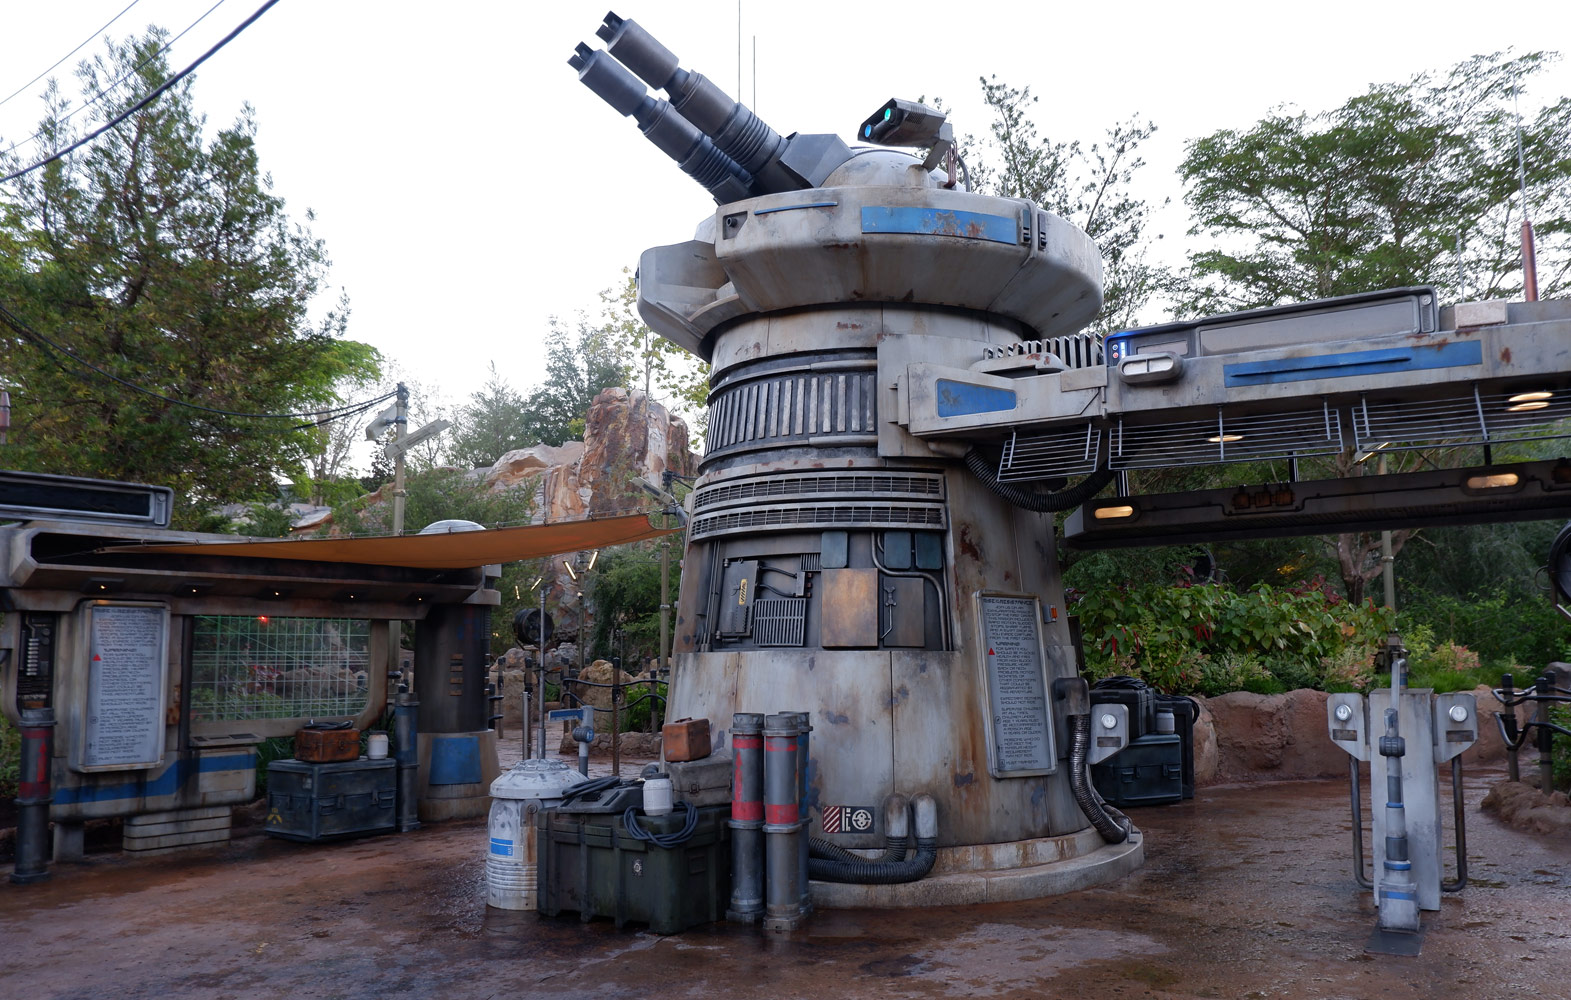 Star Wars: Rise of the Resistance new ride at Walt Disney World